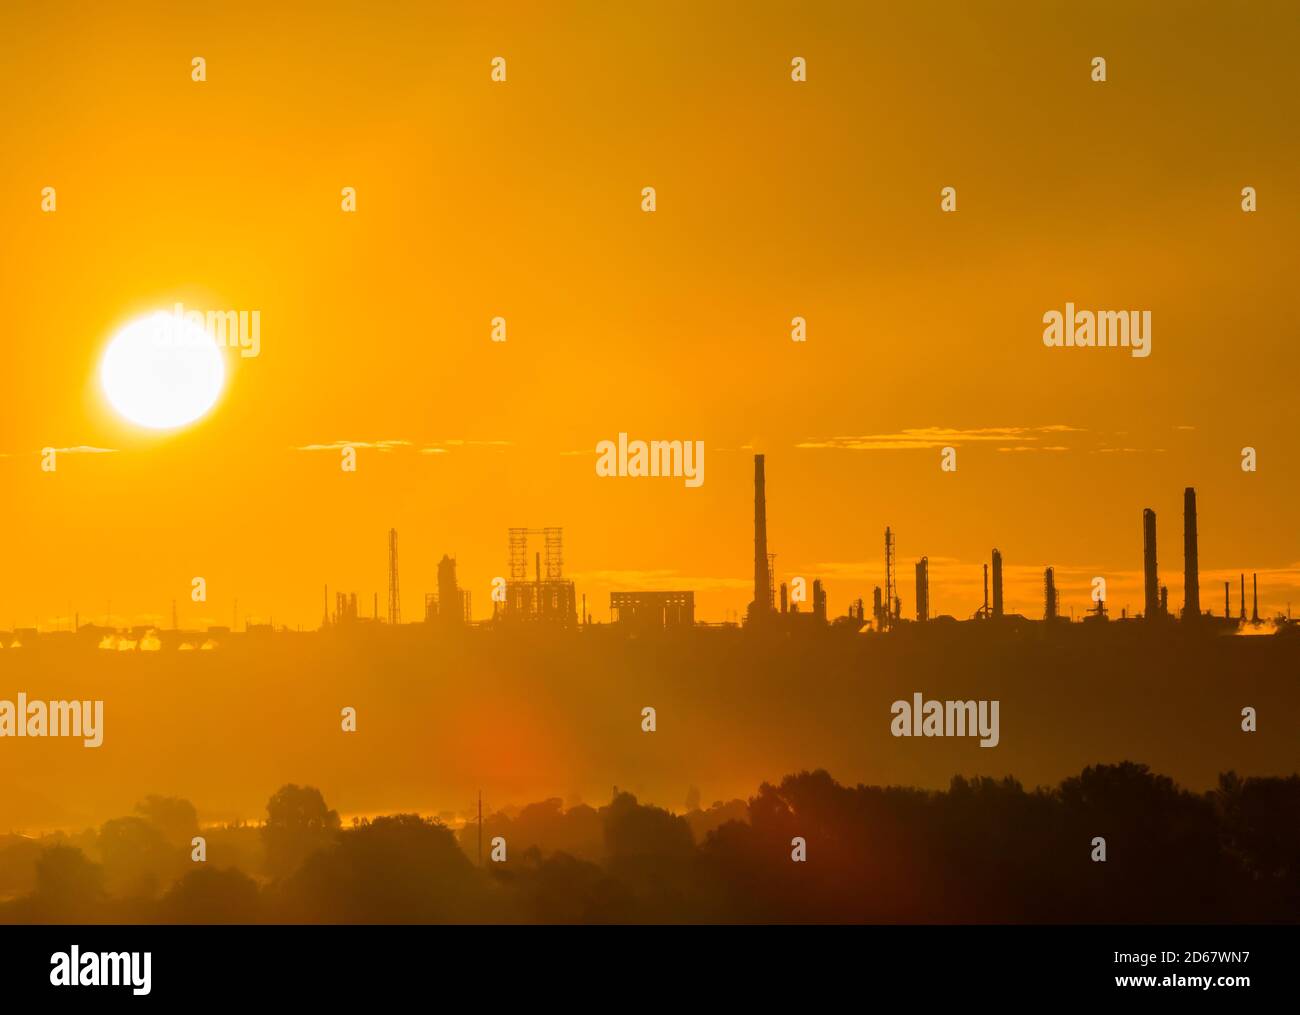 Rising sun over an oil refinery. Scarlet dawn over a petrochemical industry at the edge of a floodplain forest in early autumn morning Stock Photo